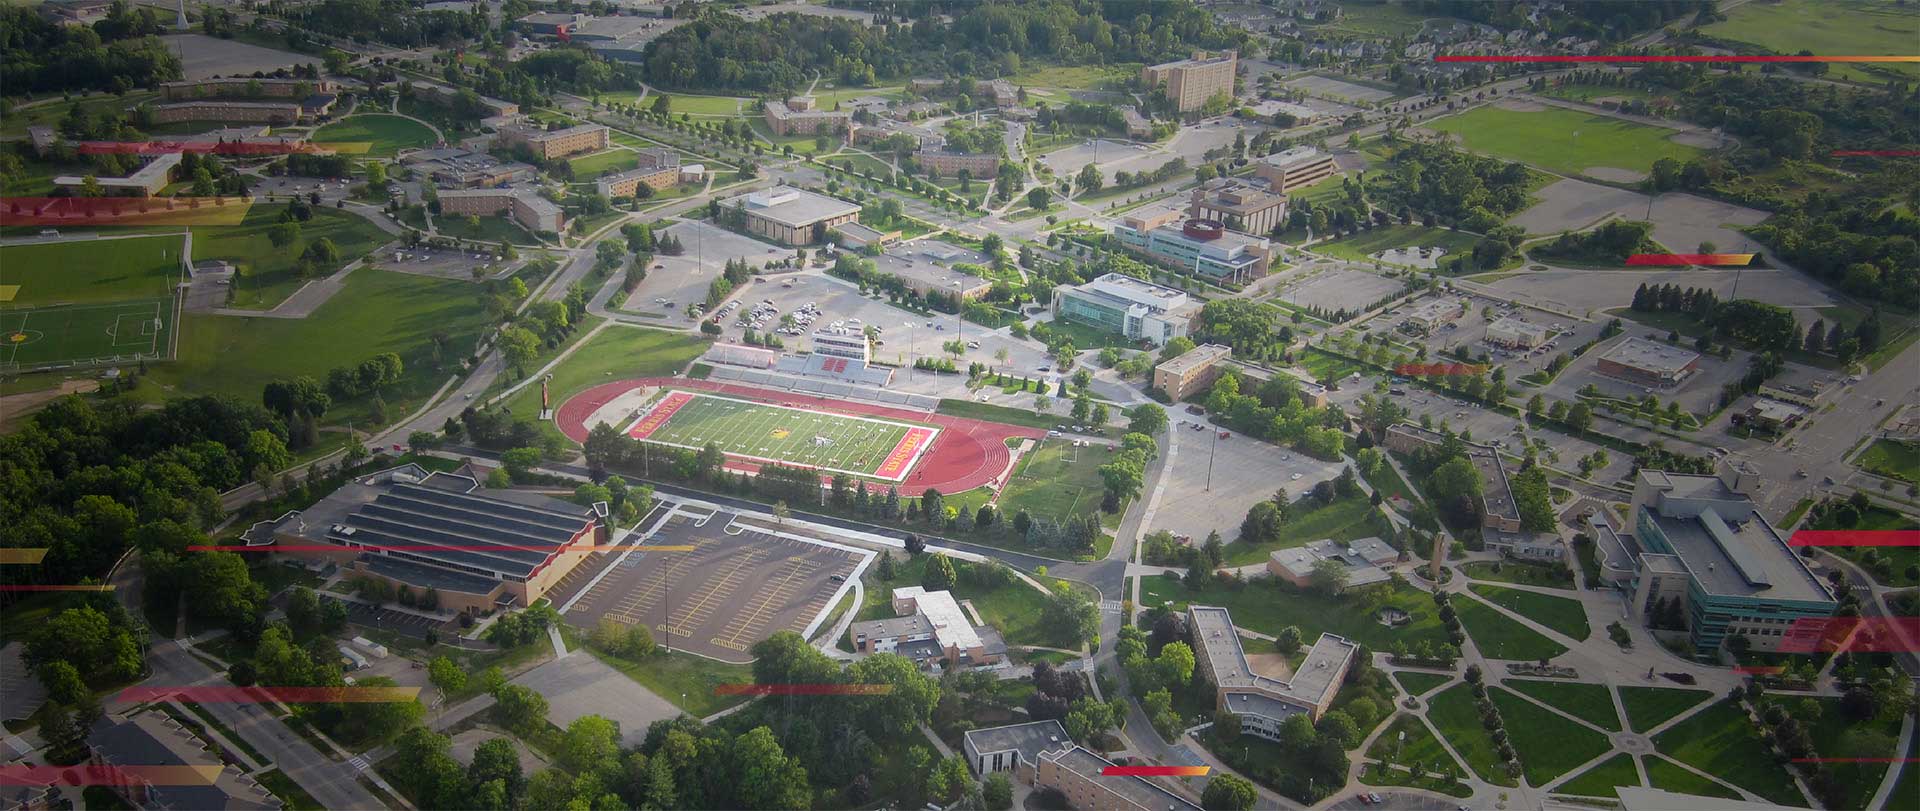 Ferris campus from above